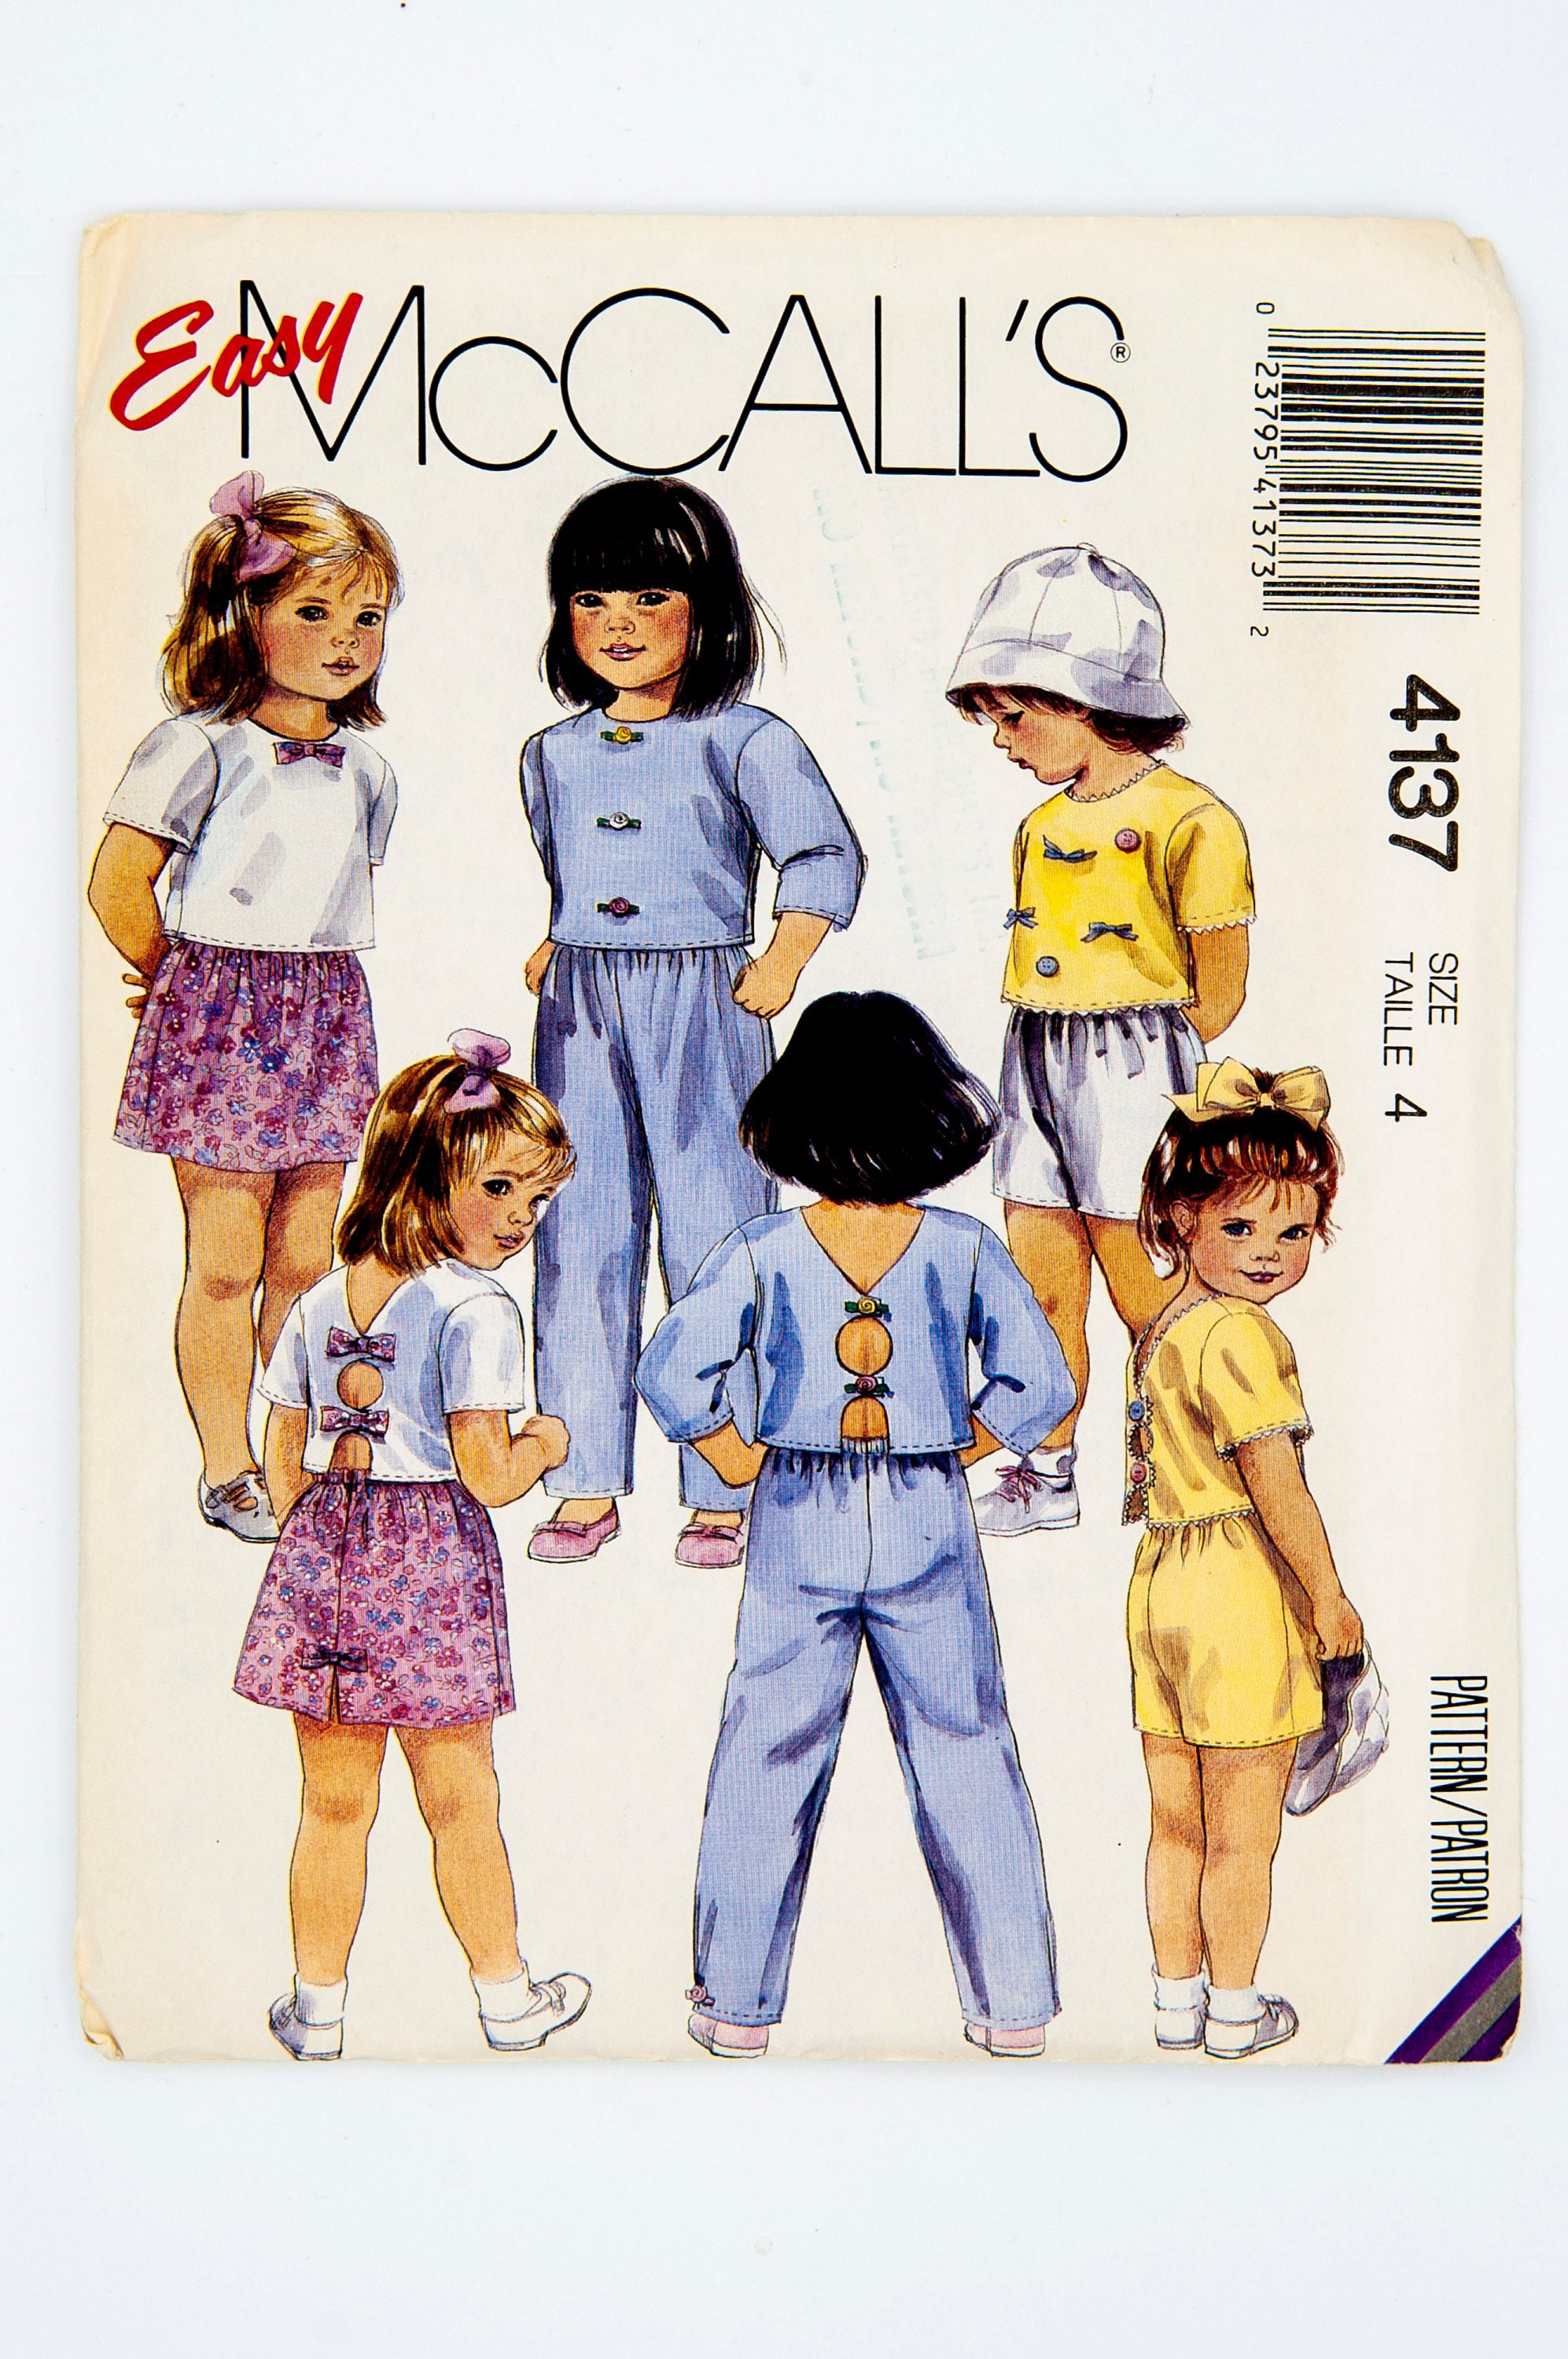 Mccall's Sewing Pattern 4137 Vintage Pattern Easy to - Etsy